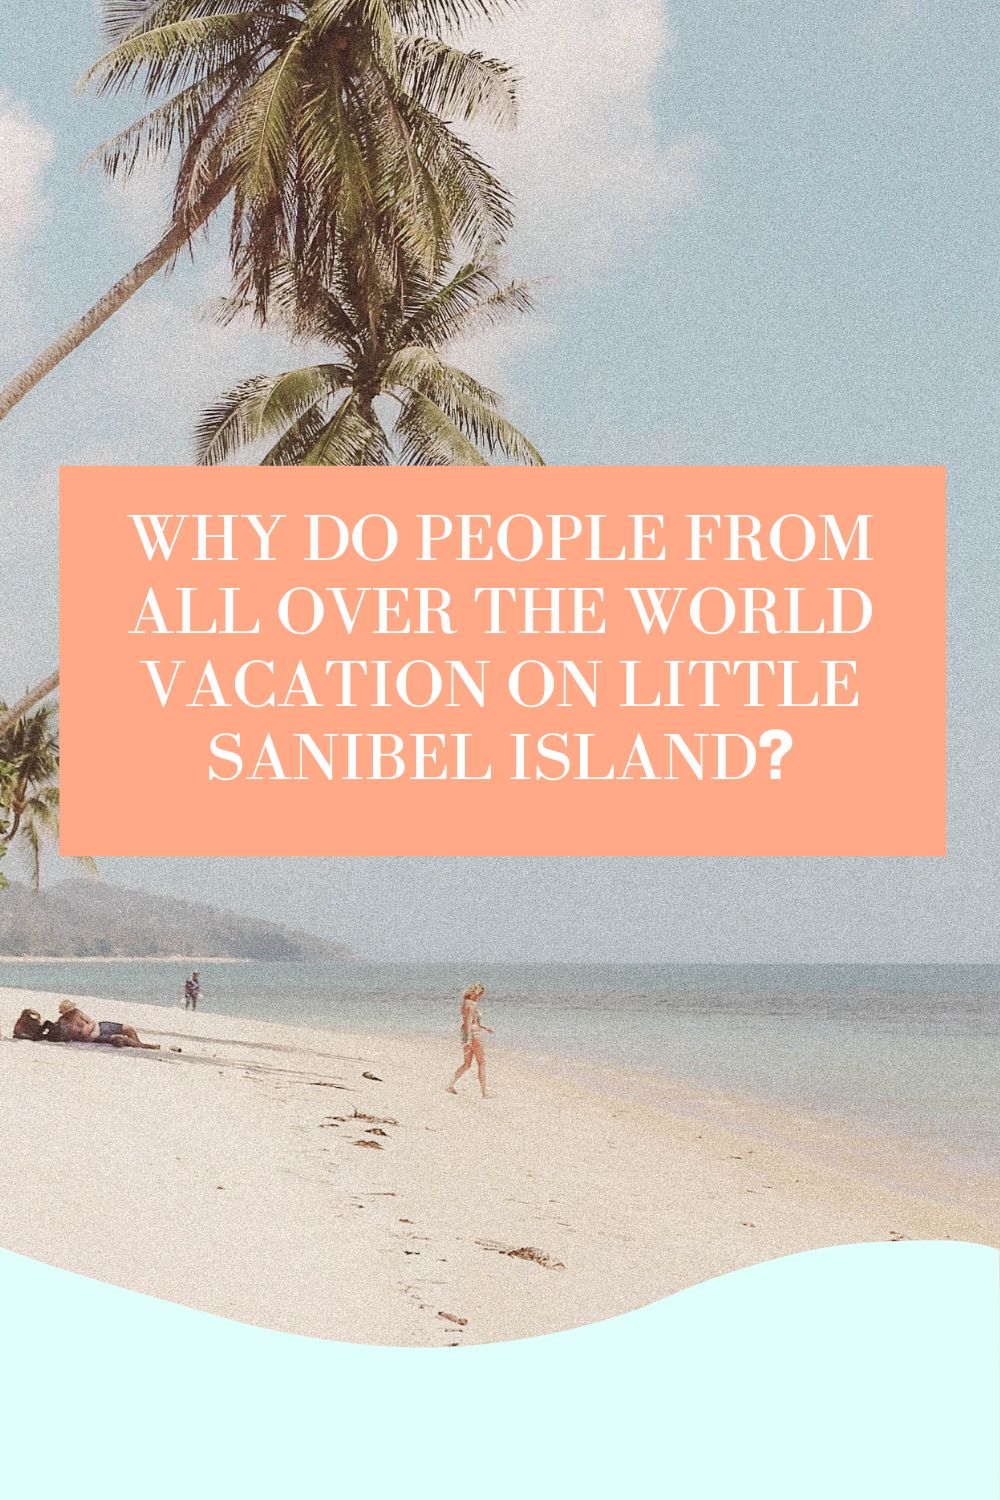 Why do People From all Over the World Vacation on Little Sanabel Island?